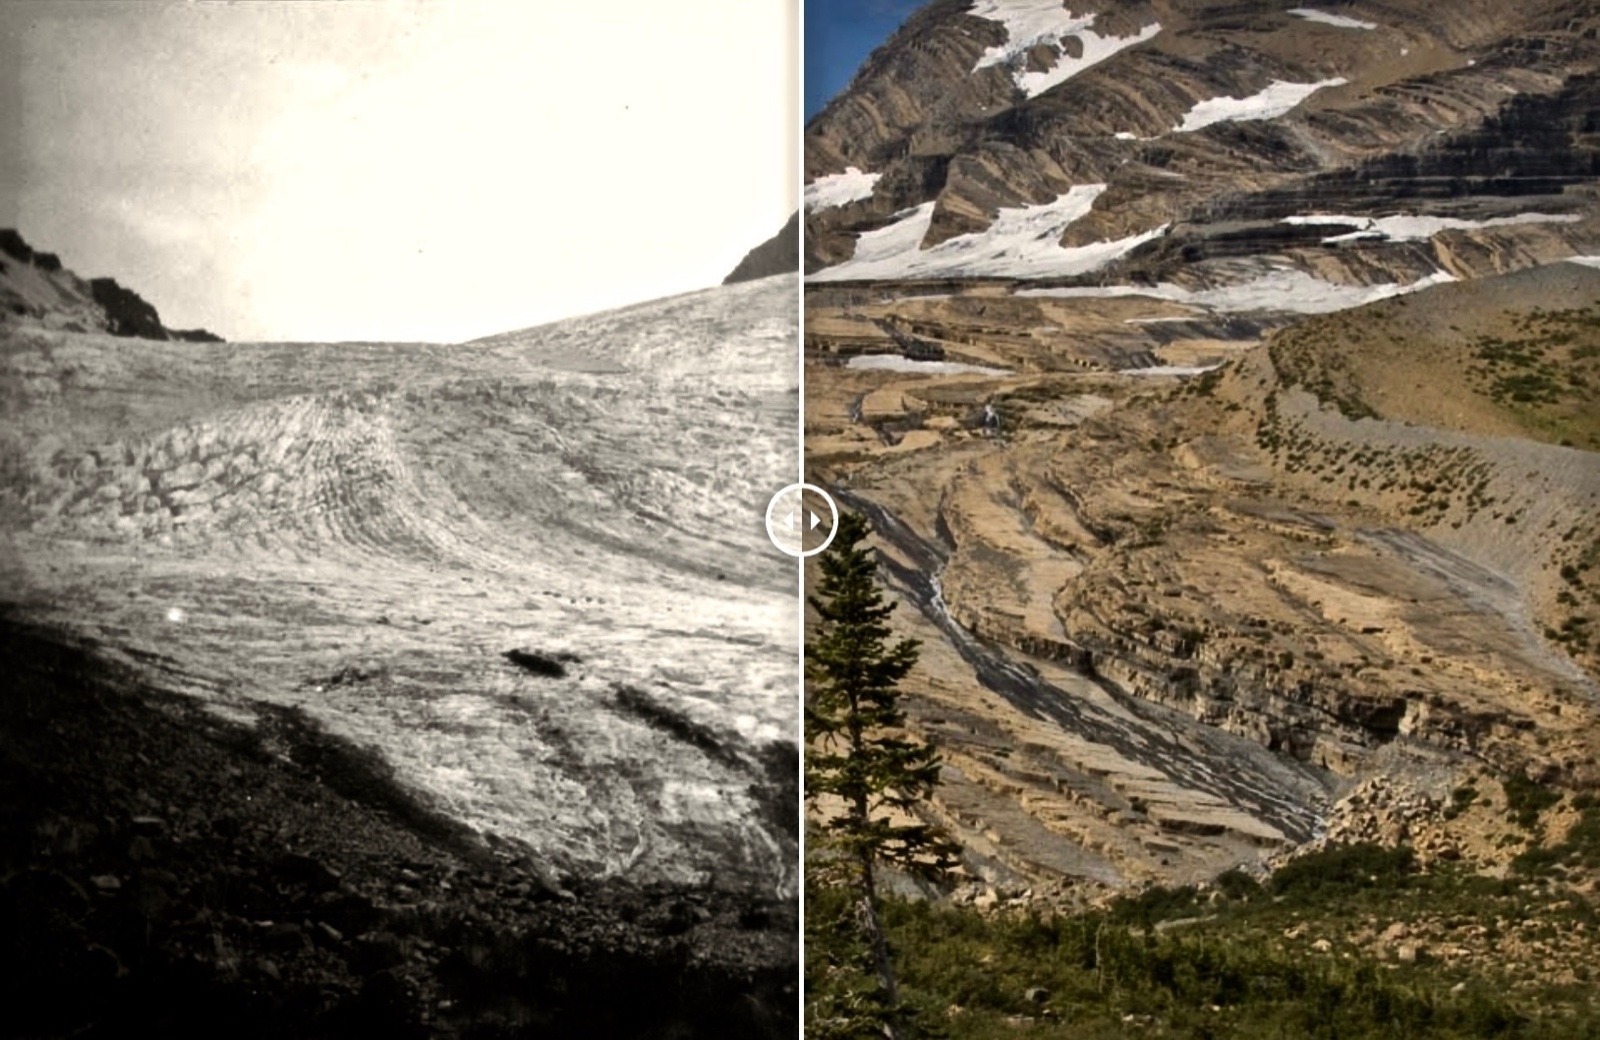 While these photos did not appear in the production of Standby Snow, reality does set a backdrop. Above: two of the most venerable landmarks in Glacier National Park—Grinnell Glacier and Jackson Glacier.  The top photo show the extent of Grinnell in 1910 and where it was after years of melting in 2017.  Photo of Grinnell in 1910 taken by Morton Elrod; photo in 2017 courtesy Lisa McKeon/USGS. Photo of Jackson Glacier taken by Elrod in 1911 and by McKeon in 2009